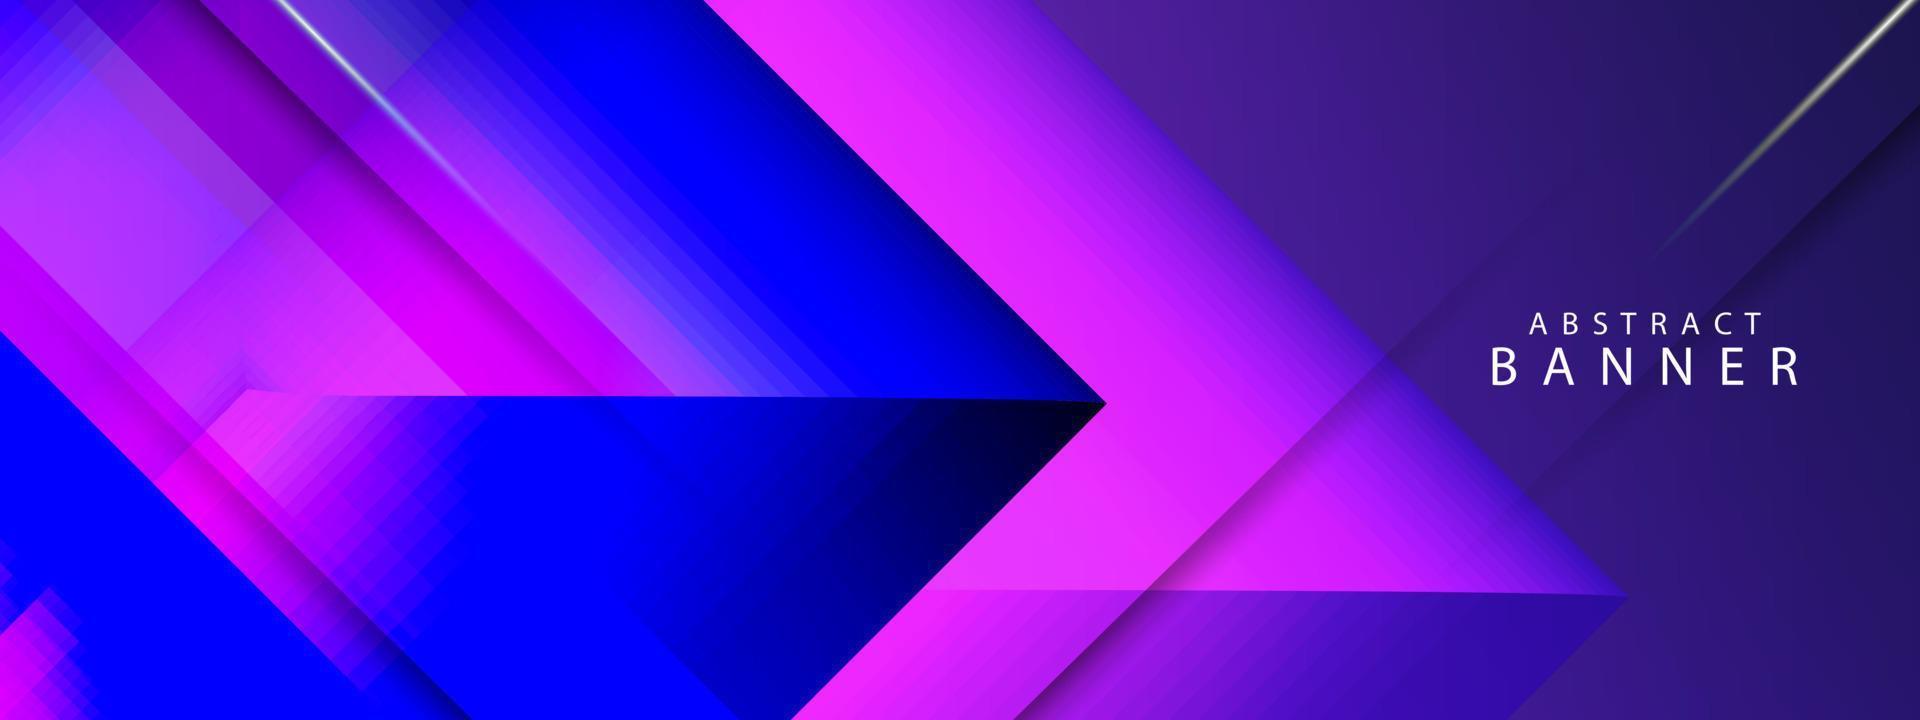 Abstract blue geometric design banner background vector